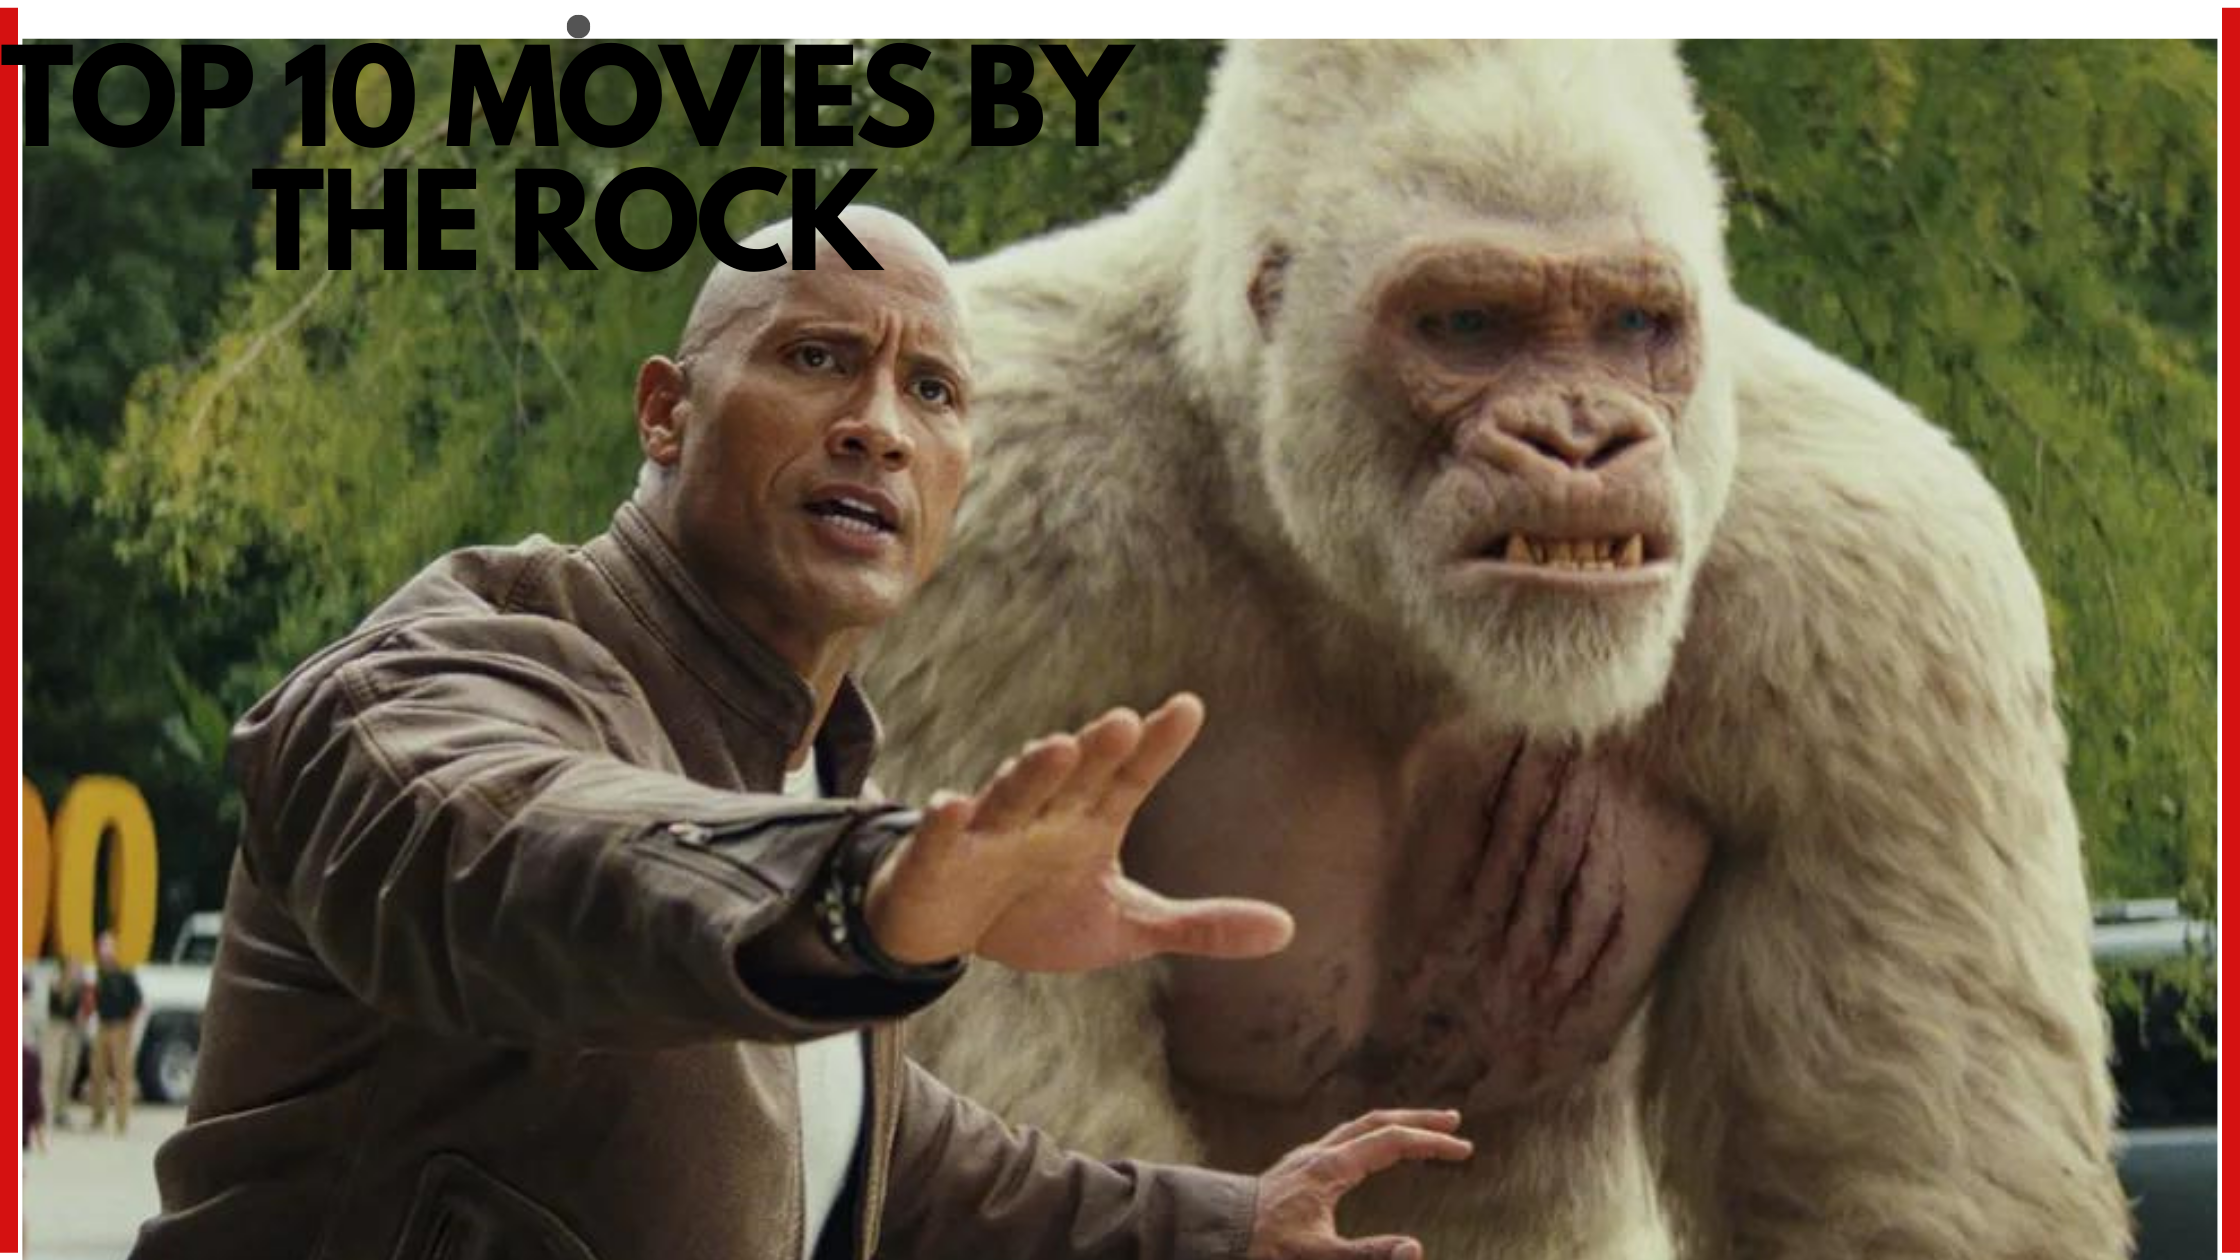 Top 10 movies by The Rock